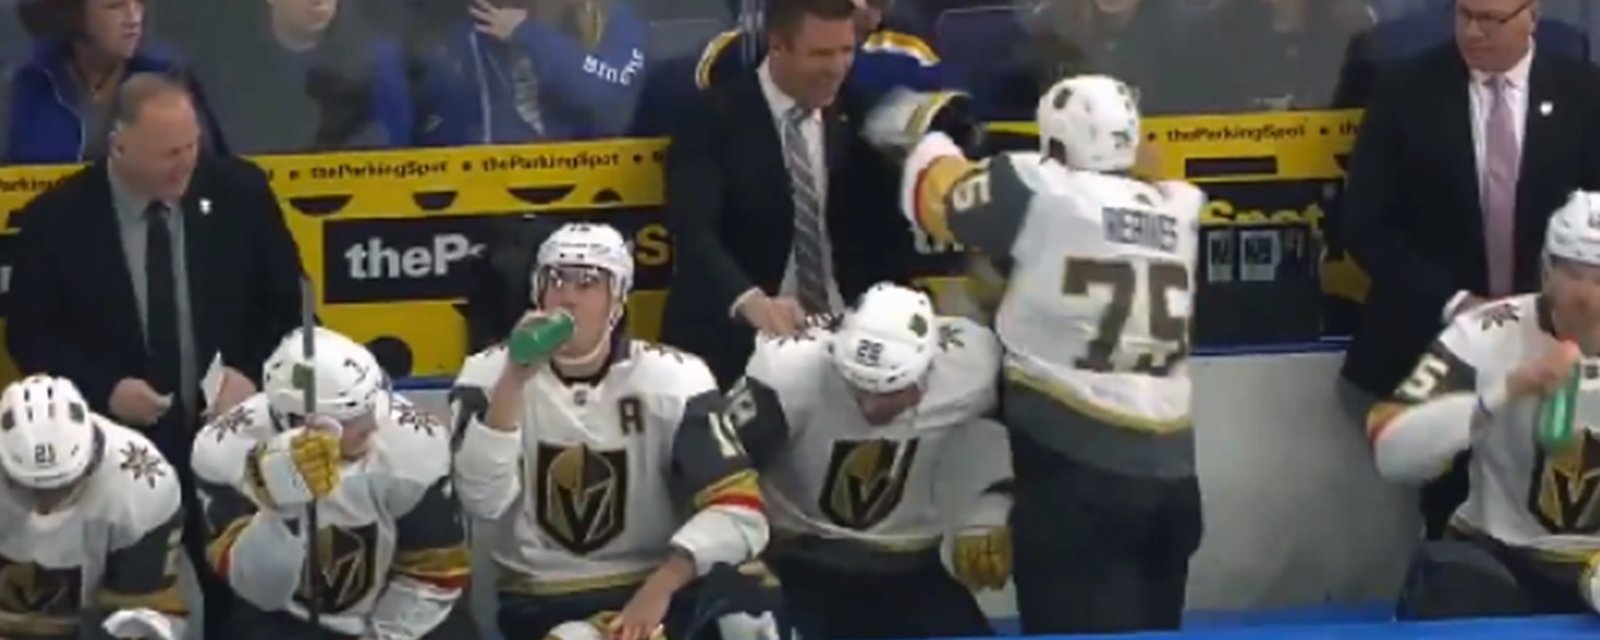 Ryan Reaves fires up the boys by challenging his coaches to a scrap on the bench